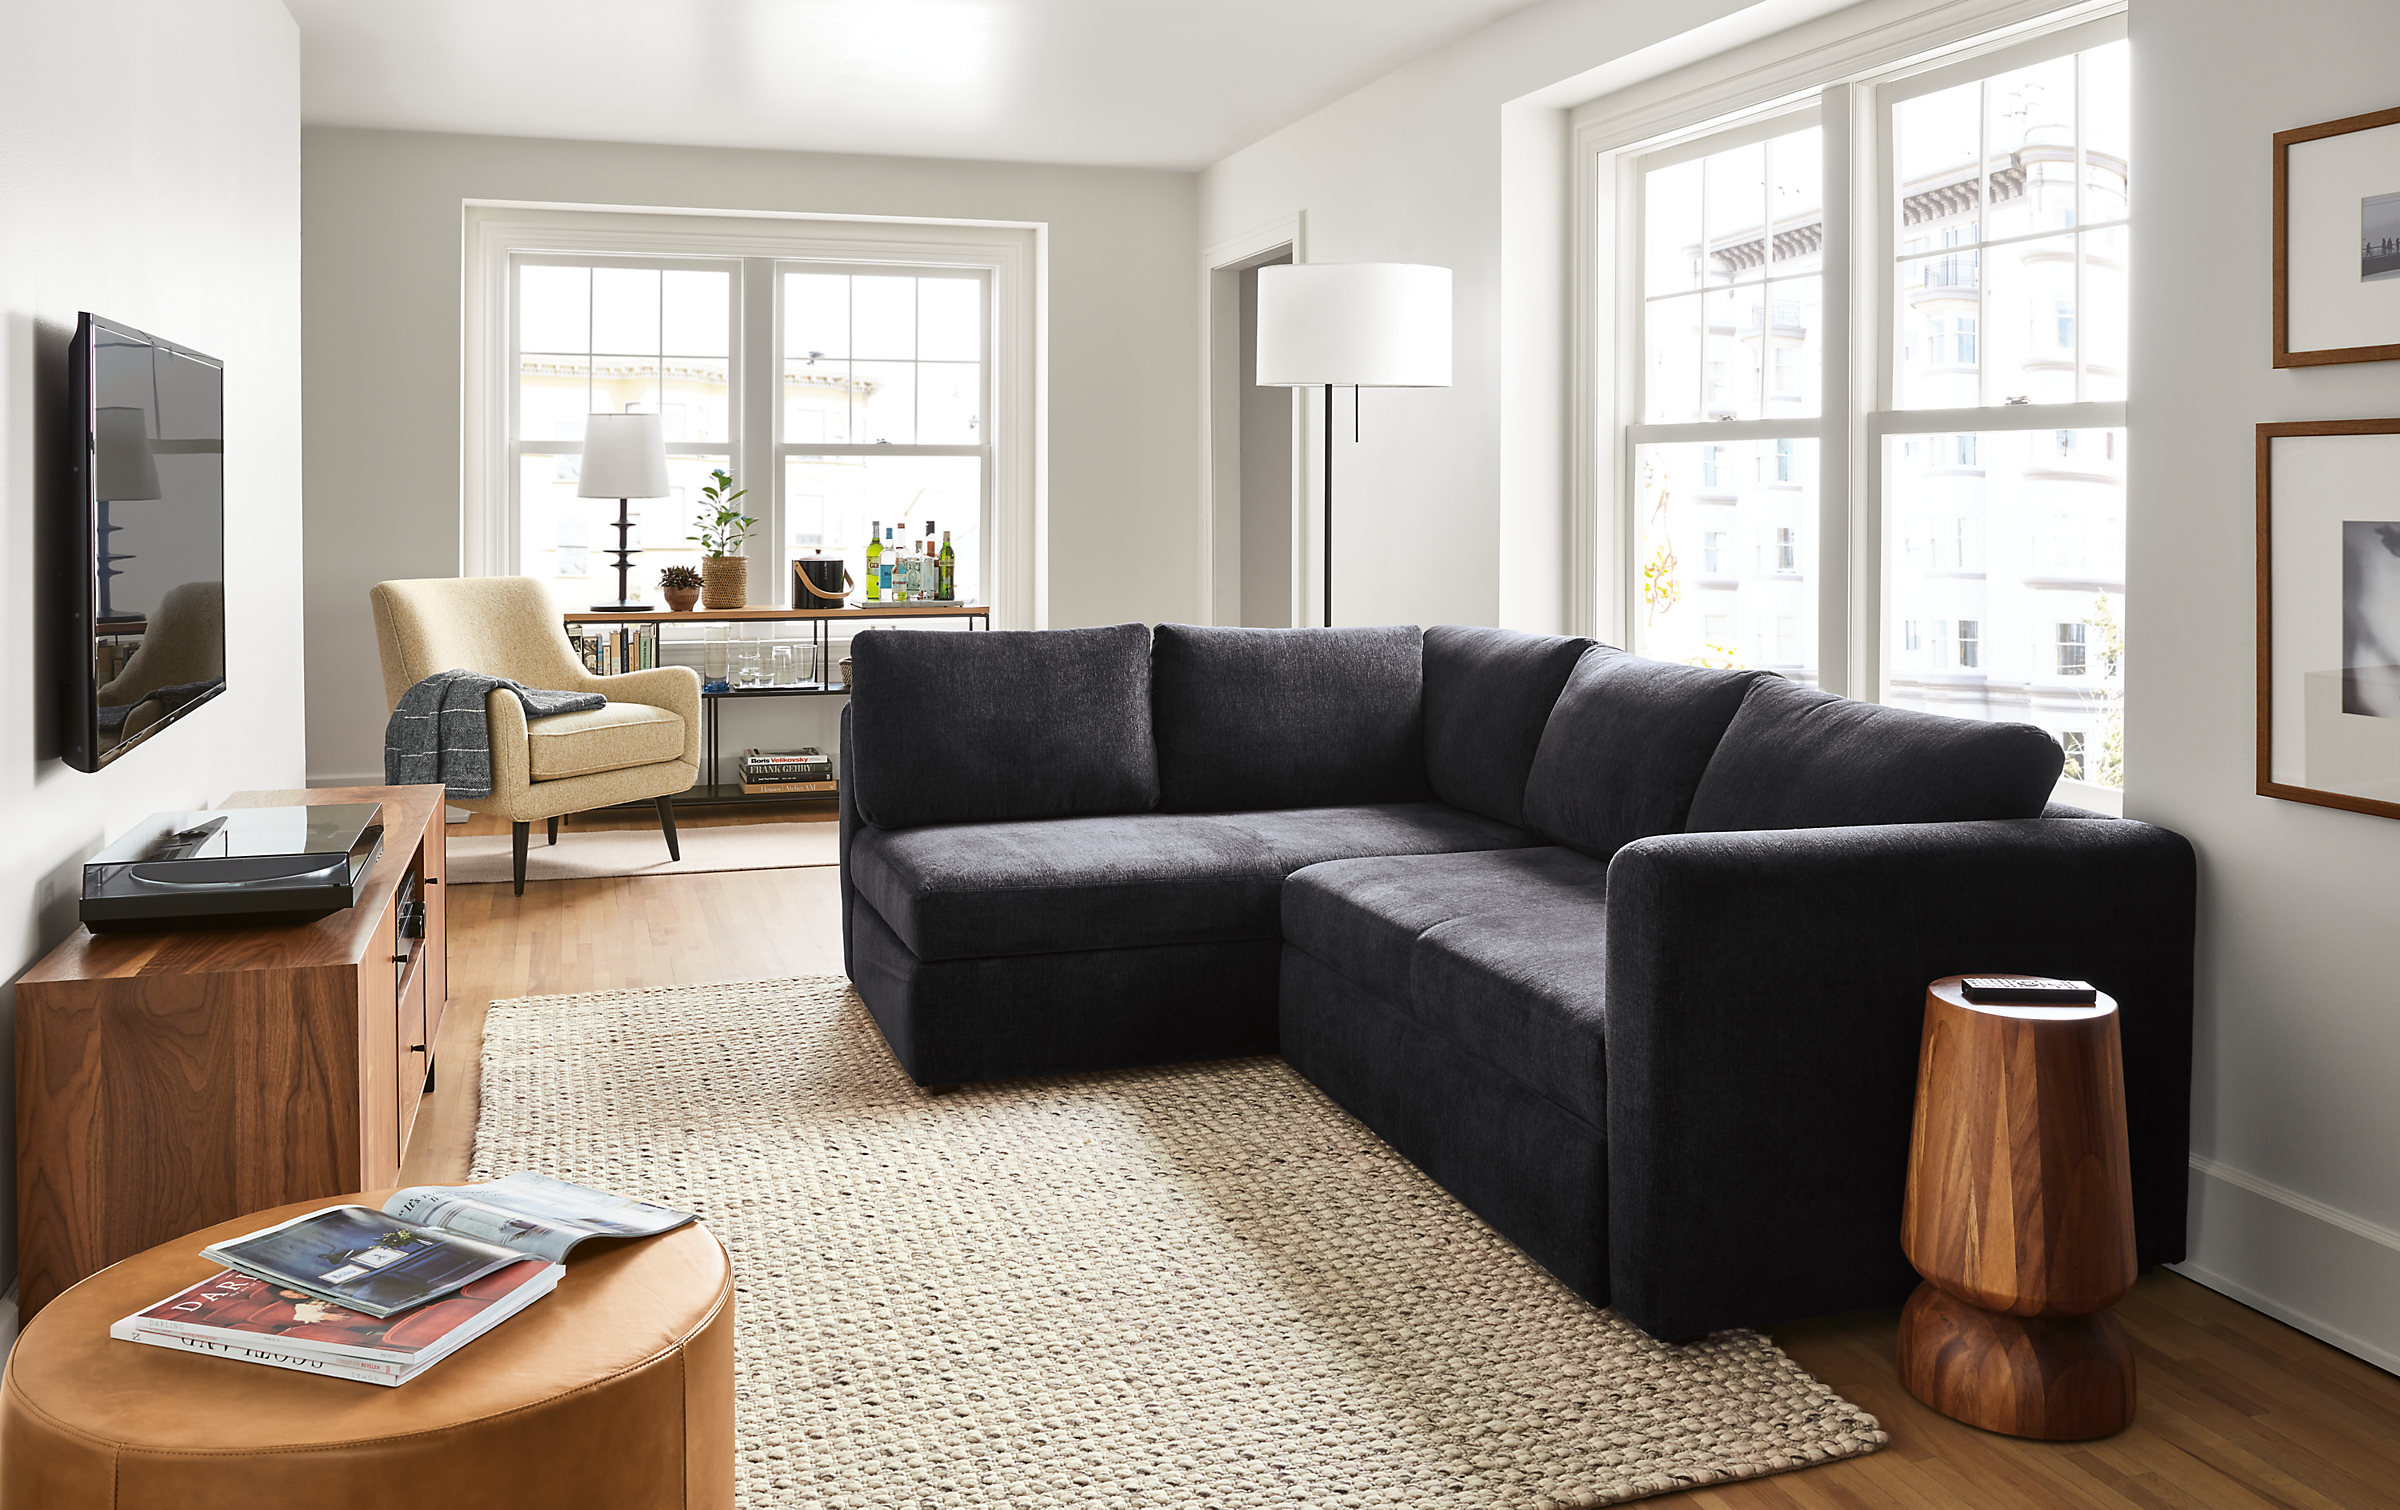 Living room setting with an Oxford Pop-Up Platform Sleeper and a Quinn Chair with an Aero Round Ottoman in leather.